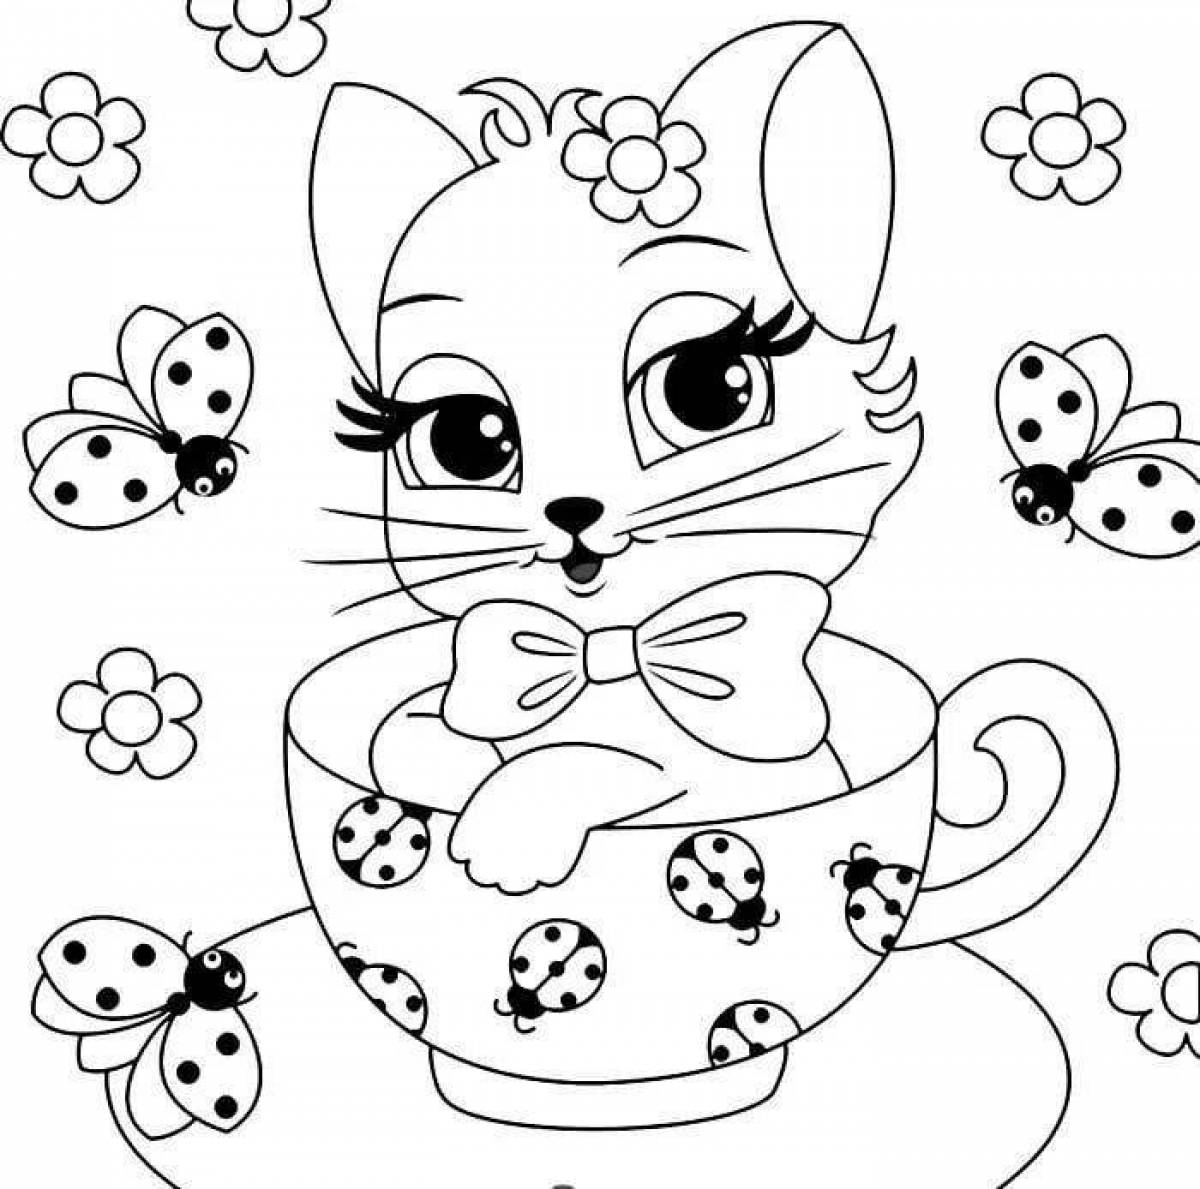 Coloring book fluffy 7 year old kitten